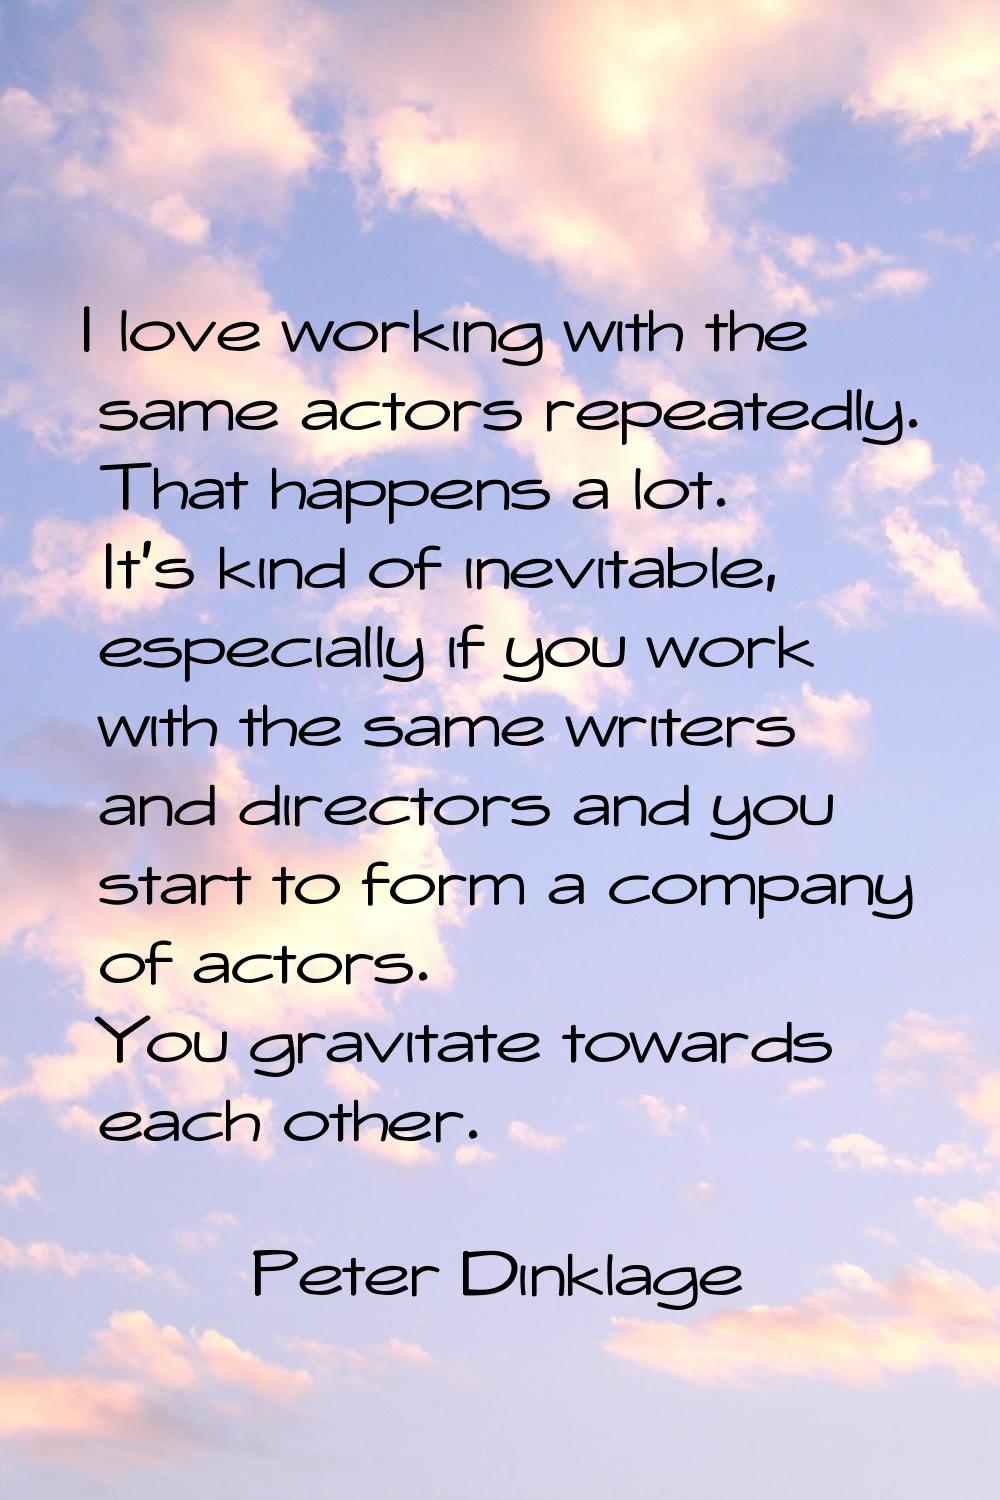 I love working with the same actors repeatedly. That happens a lot. It's kind of inevitable, especi